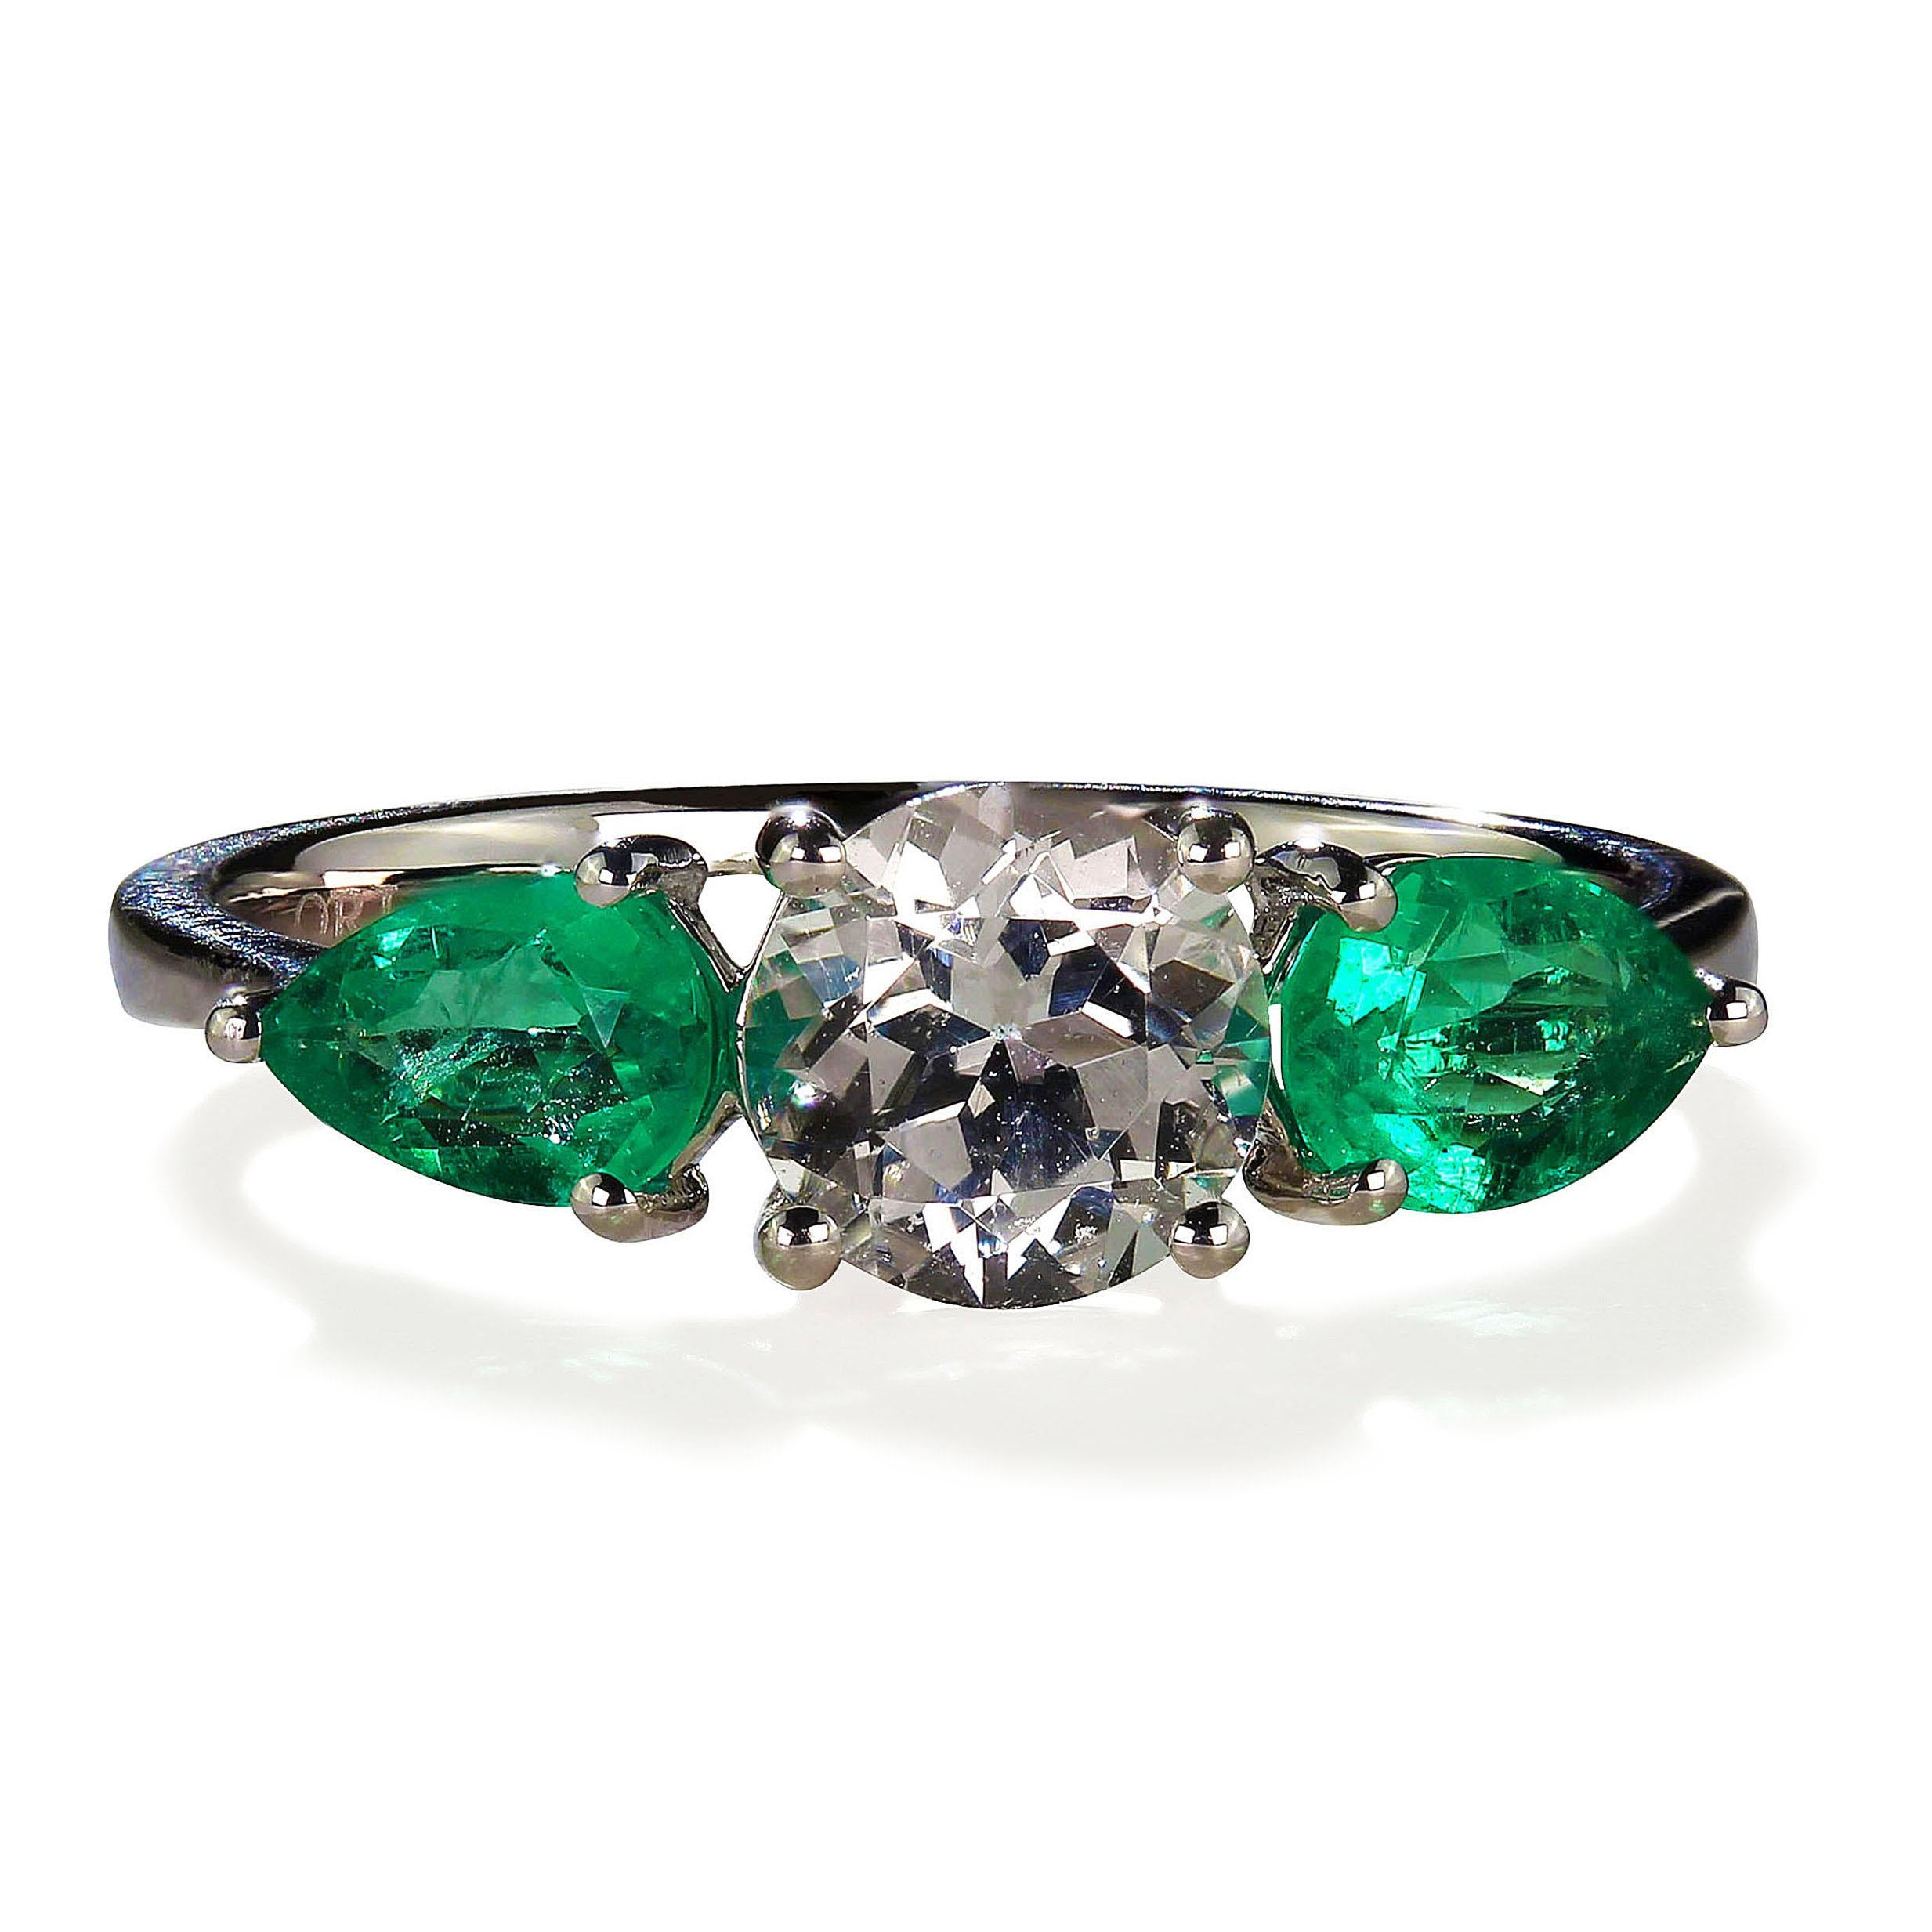 AJD Elegant Emerald and Silver Topaz Cocktail Ring  May Birthstone 2